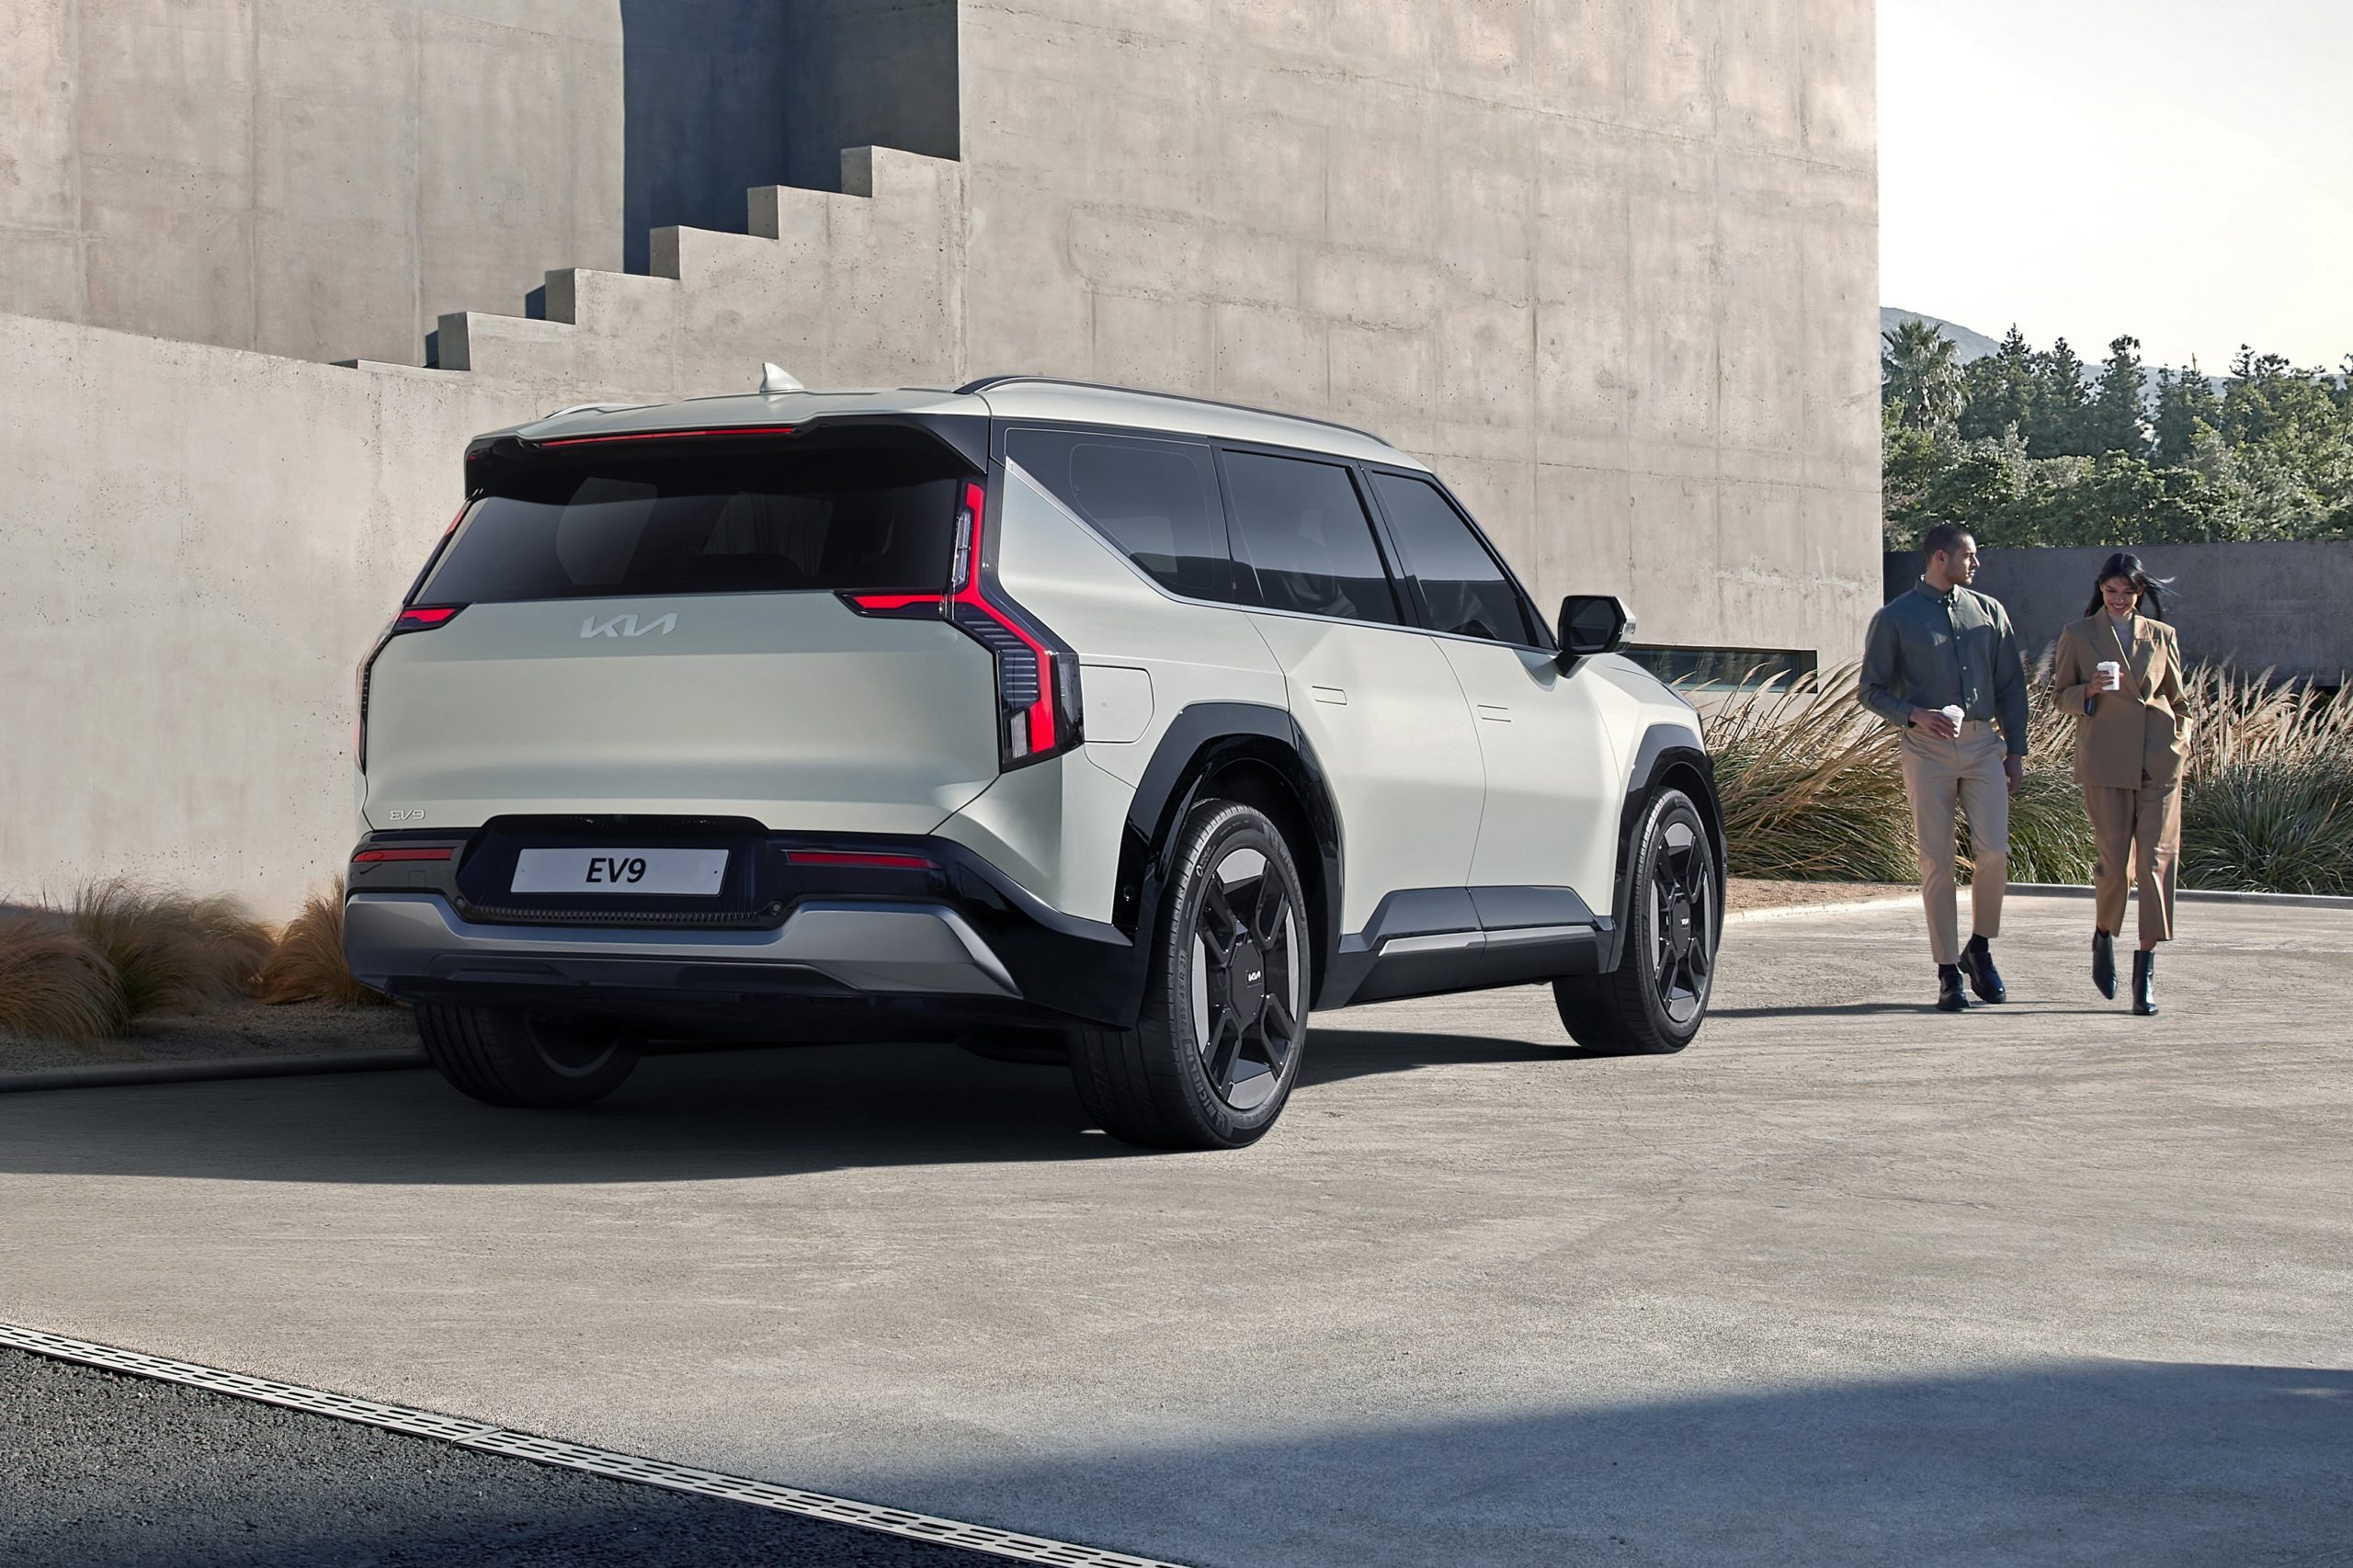 2023 kia ev9 electric suv: prices, specs and release date